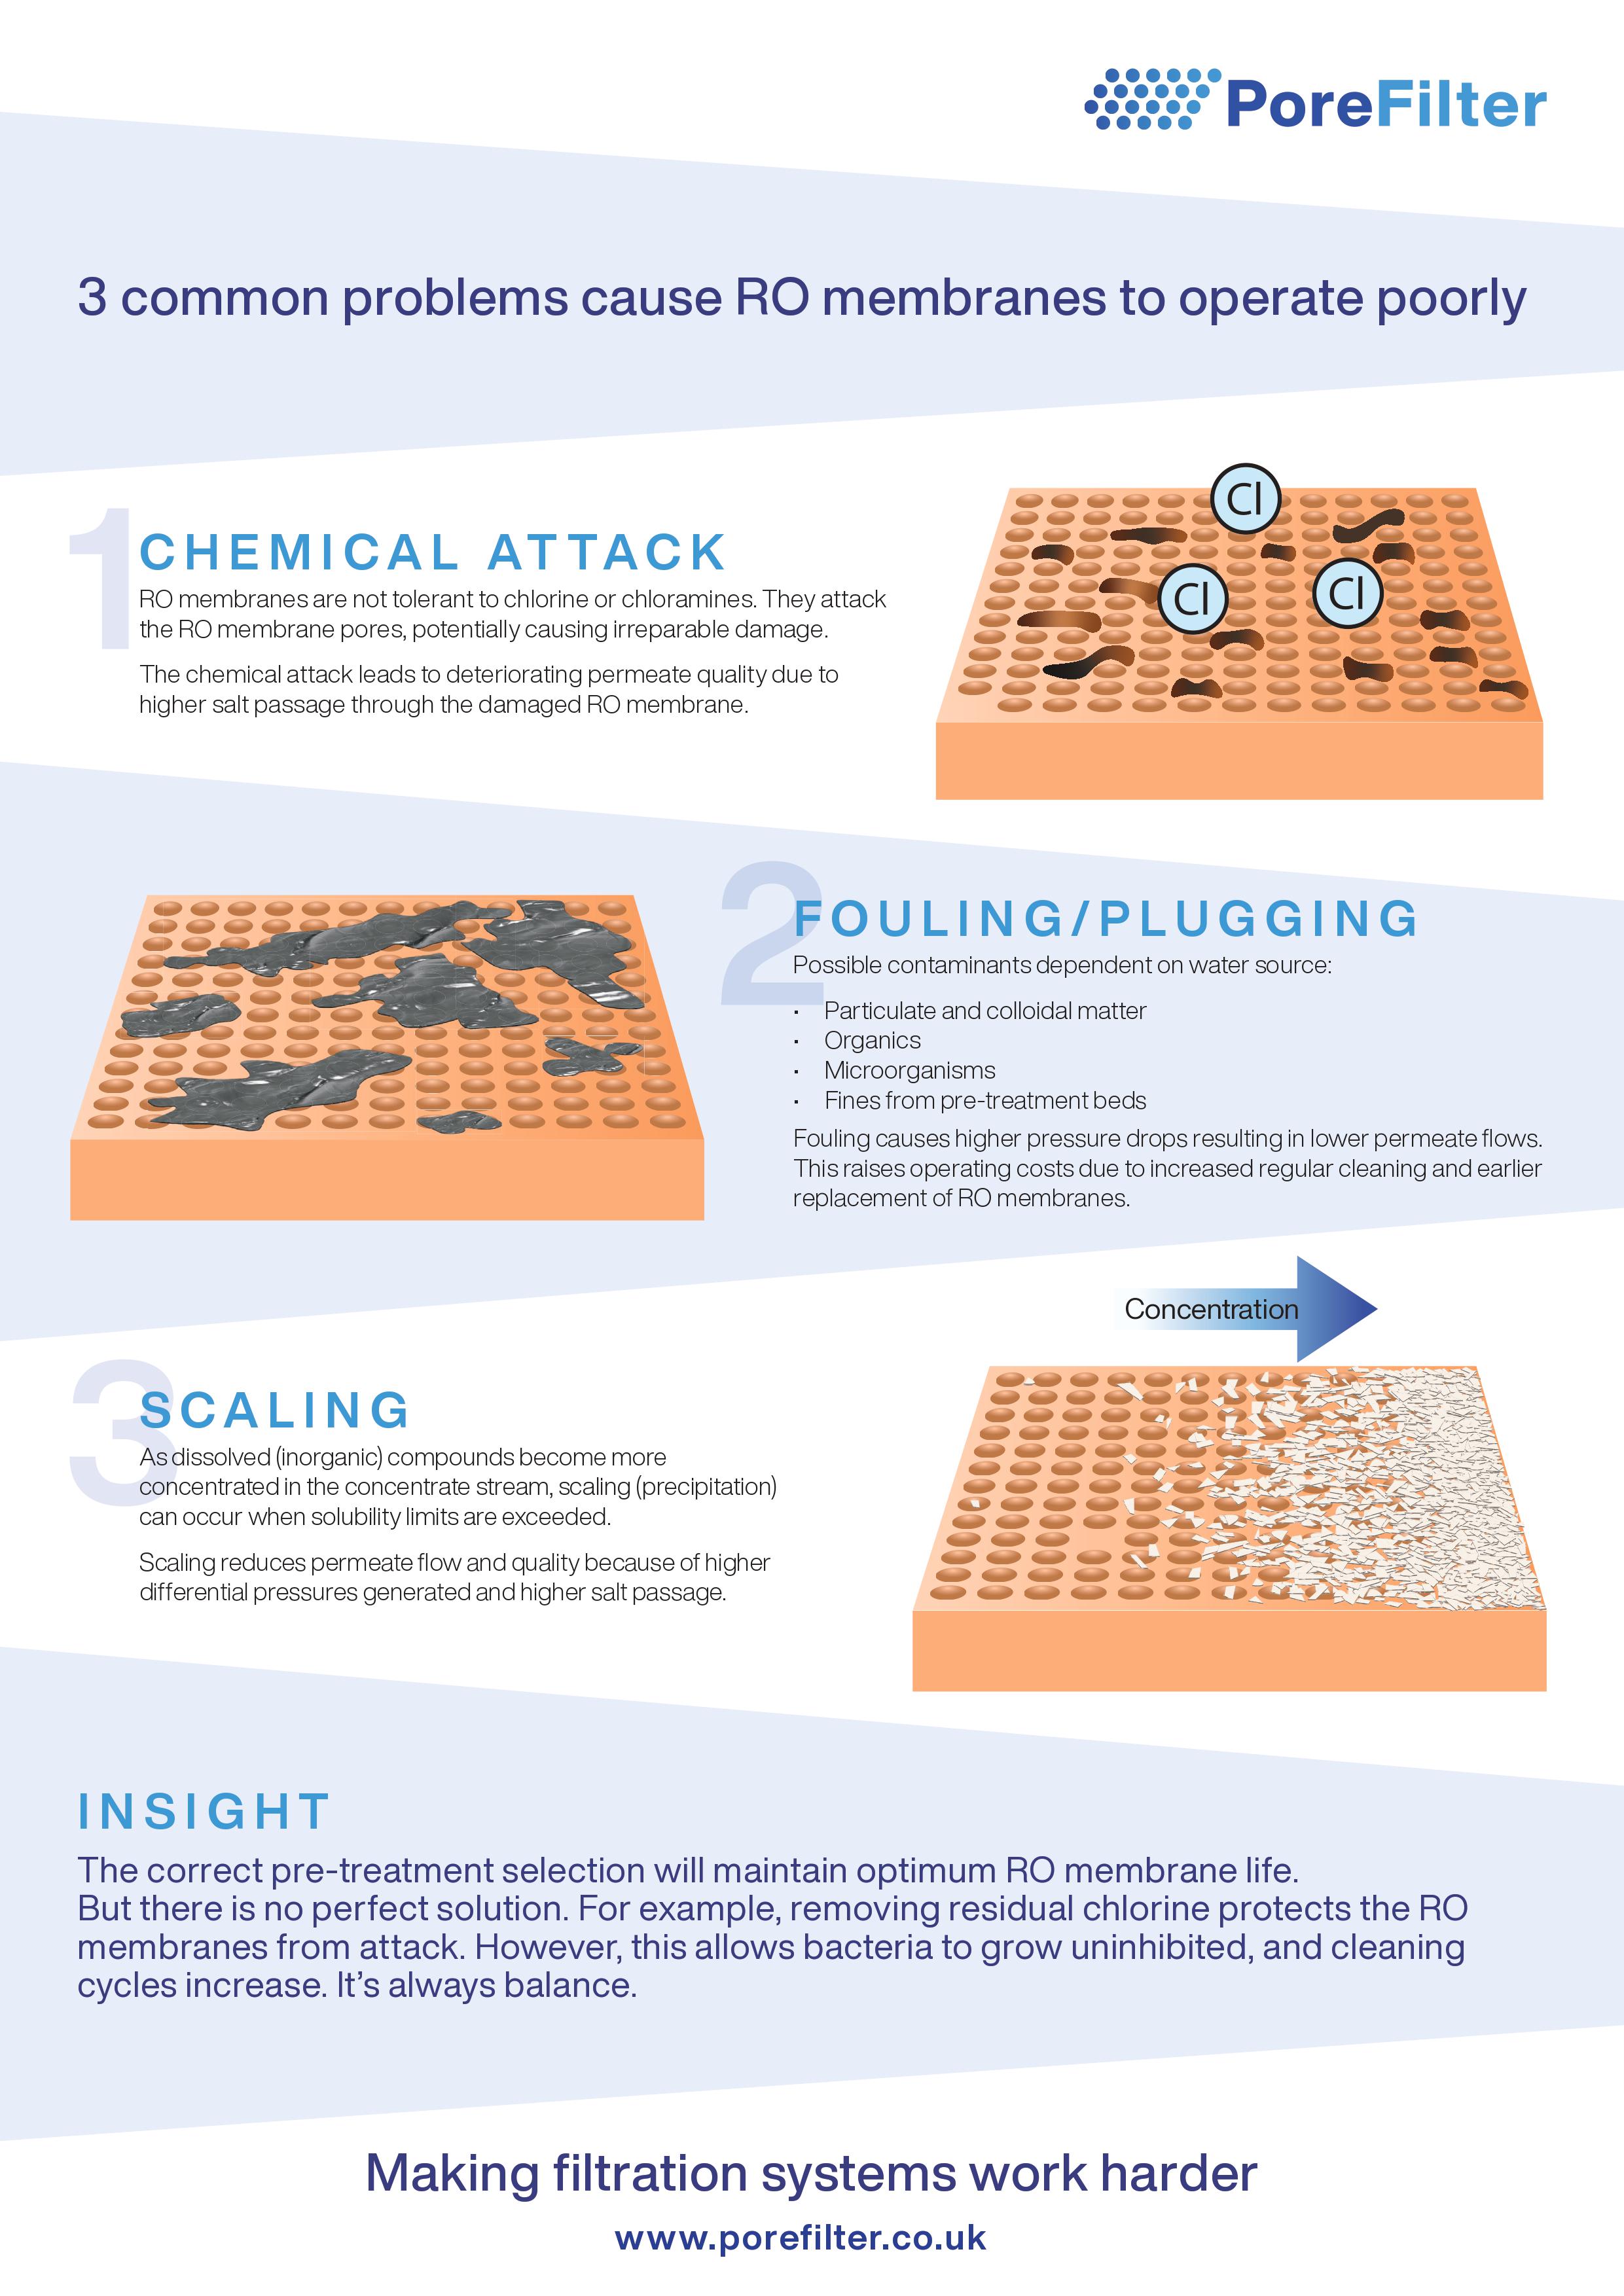 3-main-reasons-cause-RO-membranes-to-operate-poorly-infographic